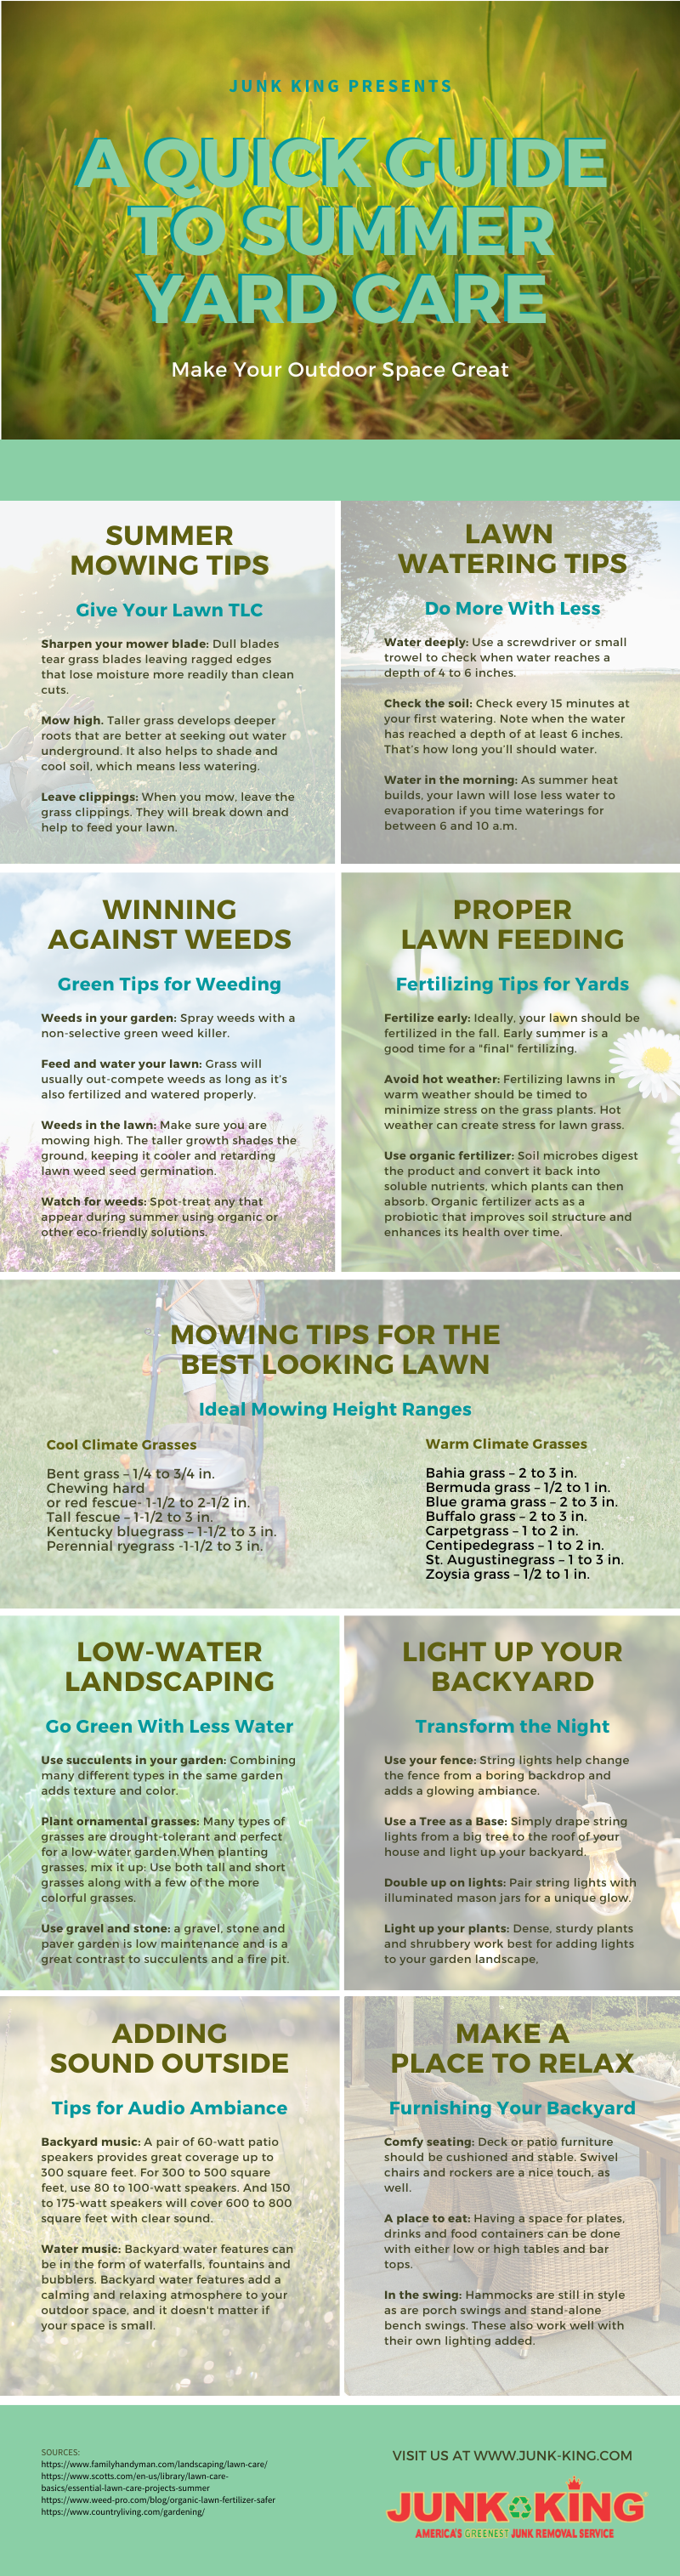 A Quick Guide To Summer Yard Care